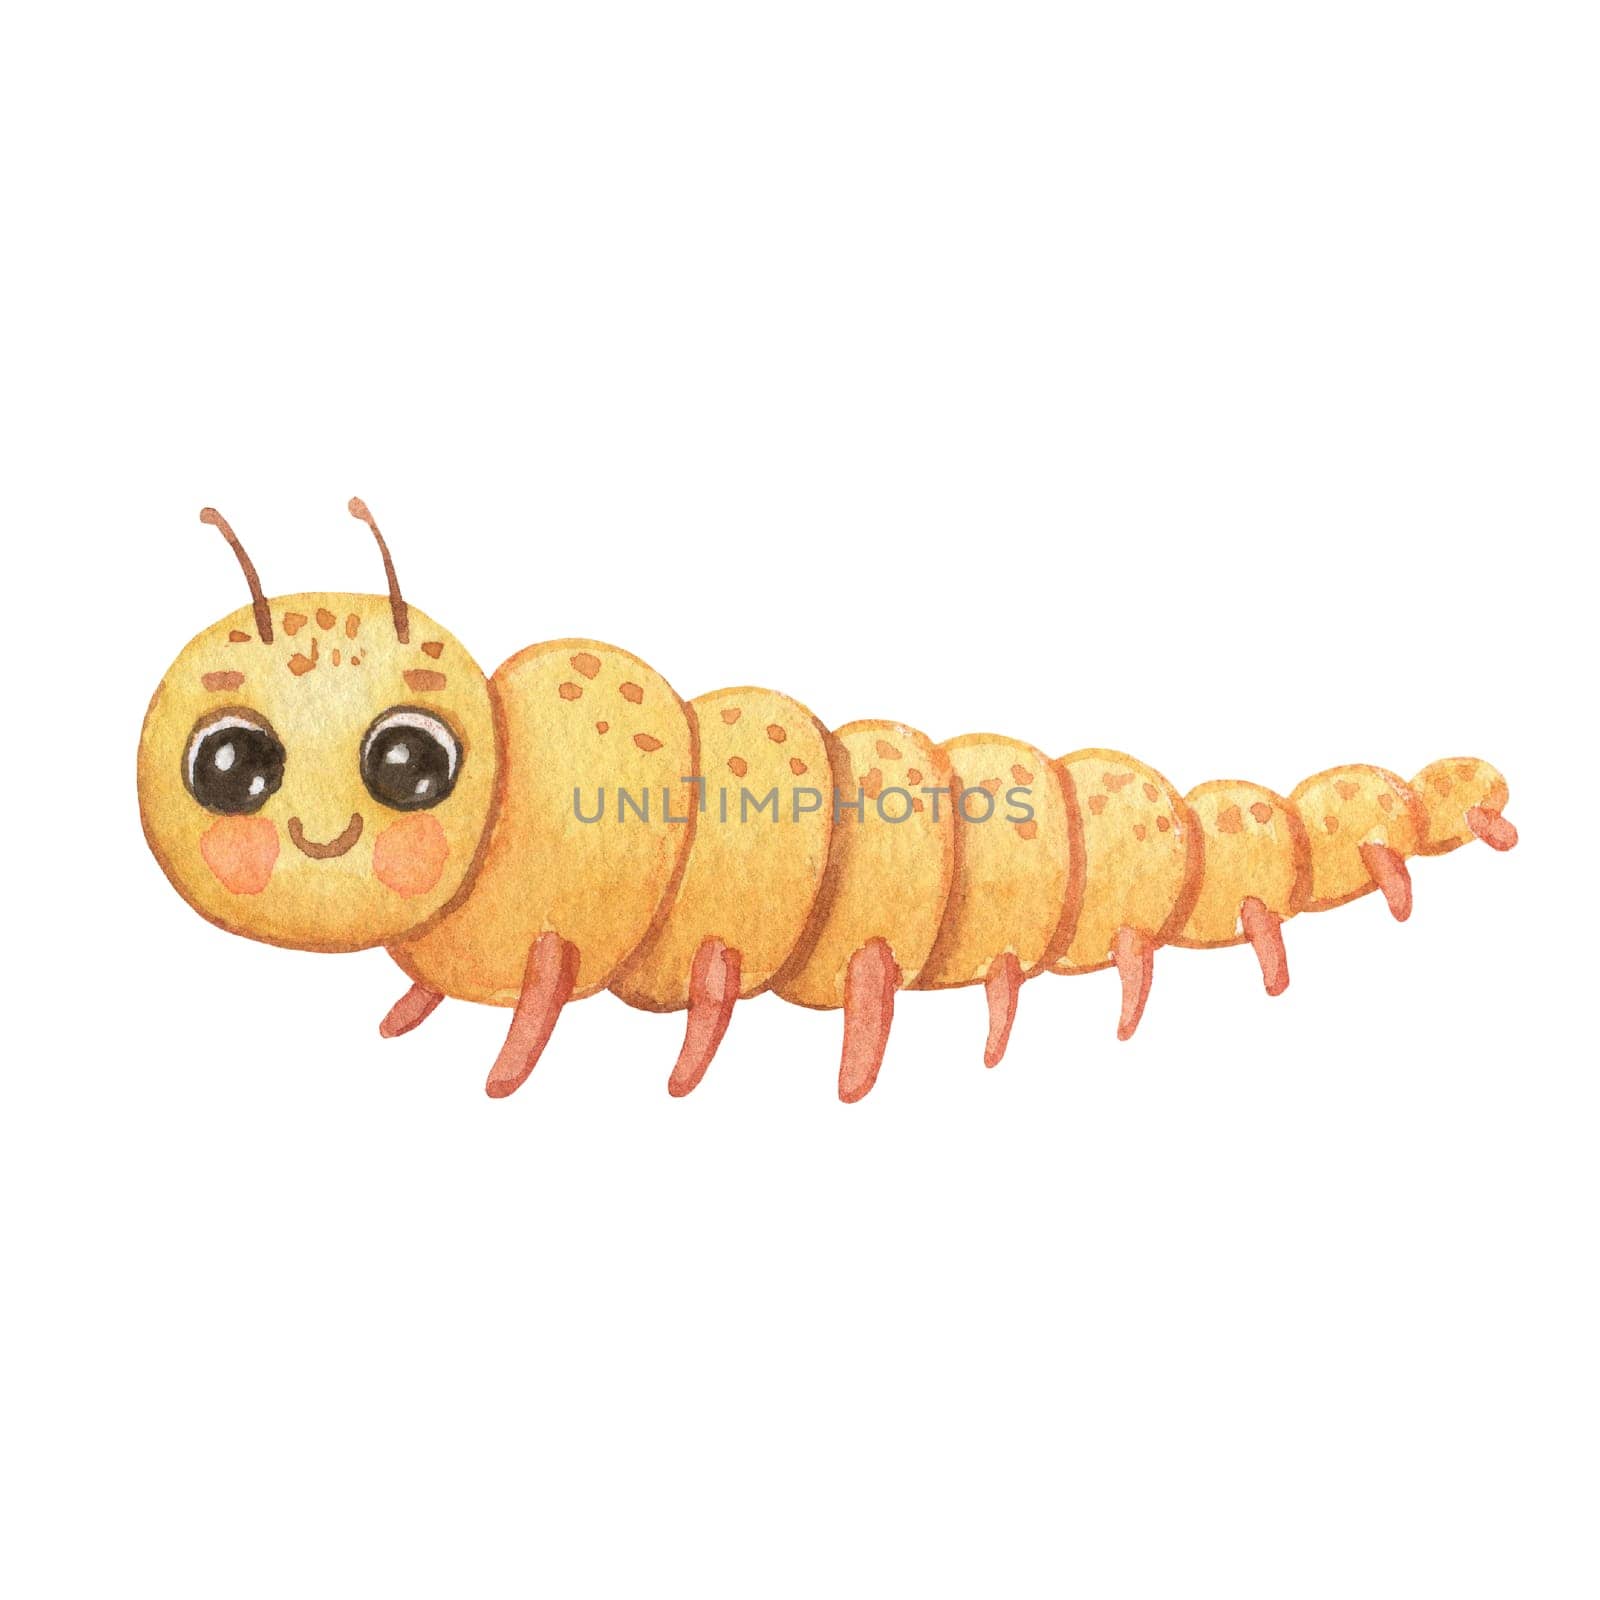 Cute smiling caterpillar isolated on white. Funny insect for children. Watercolor cartoon illustration by ElenaPlatova